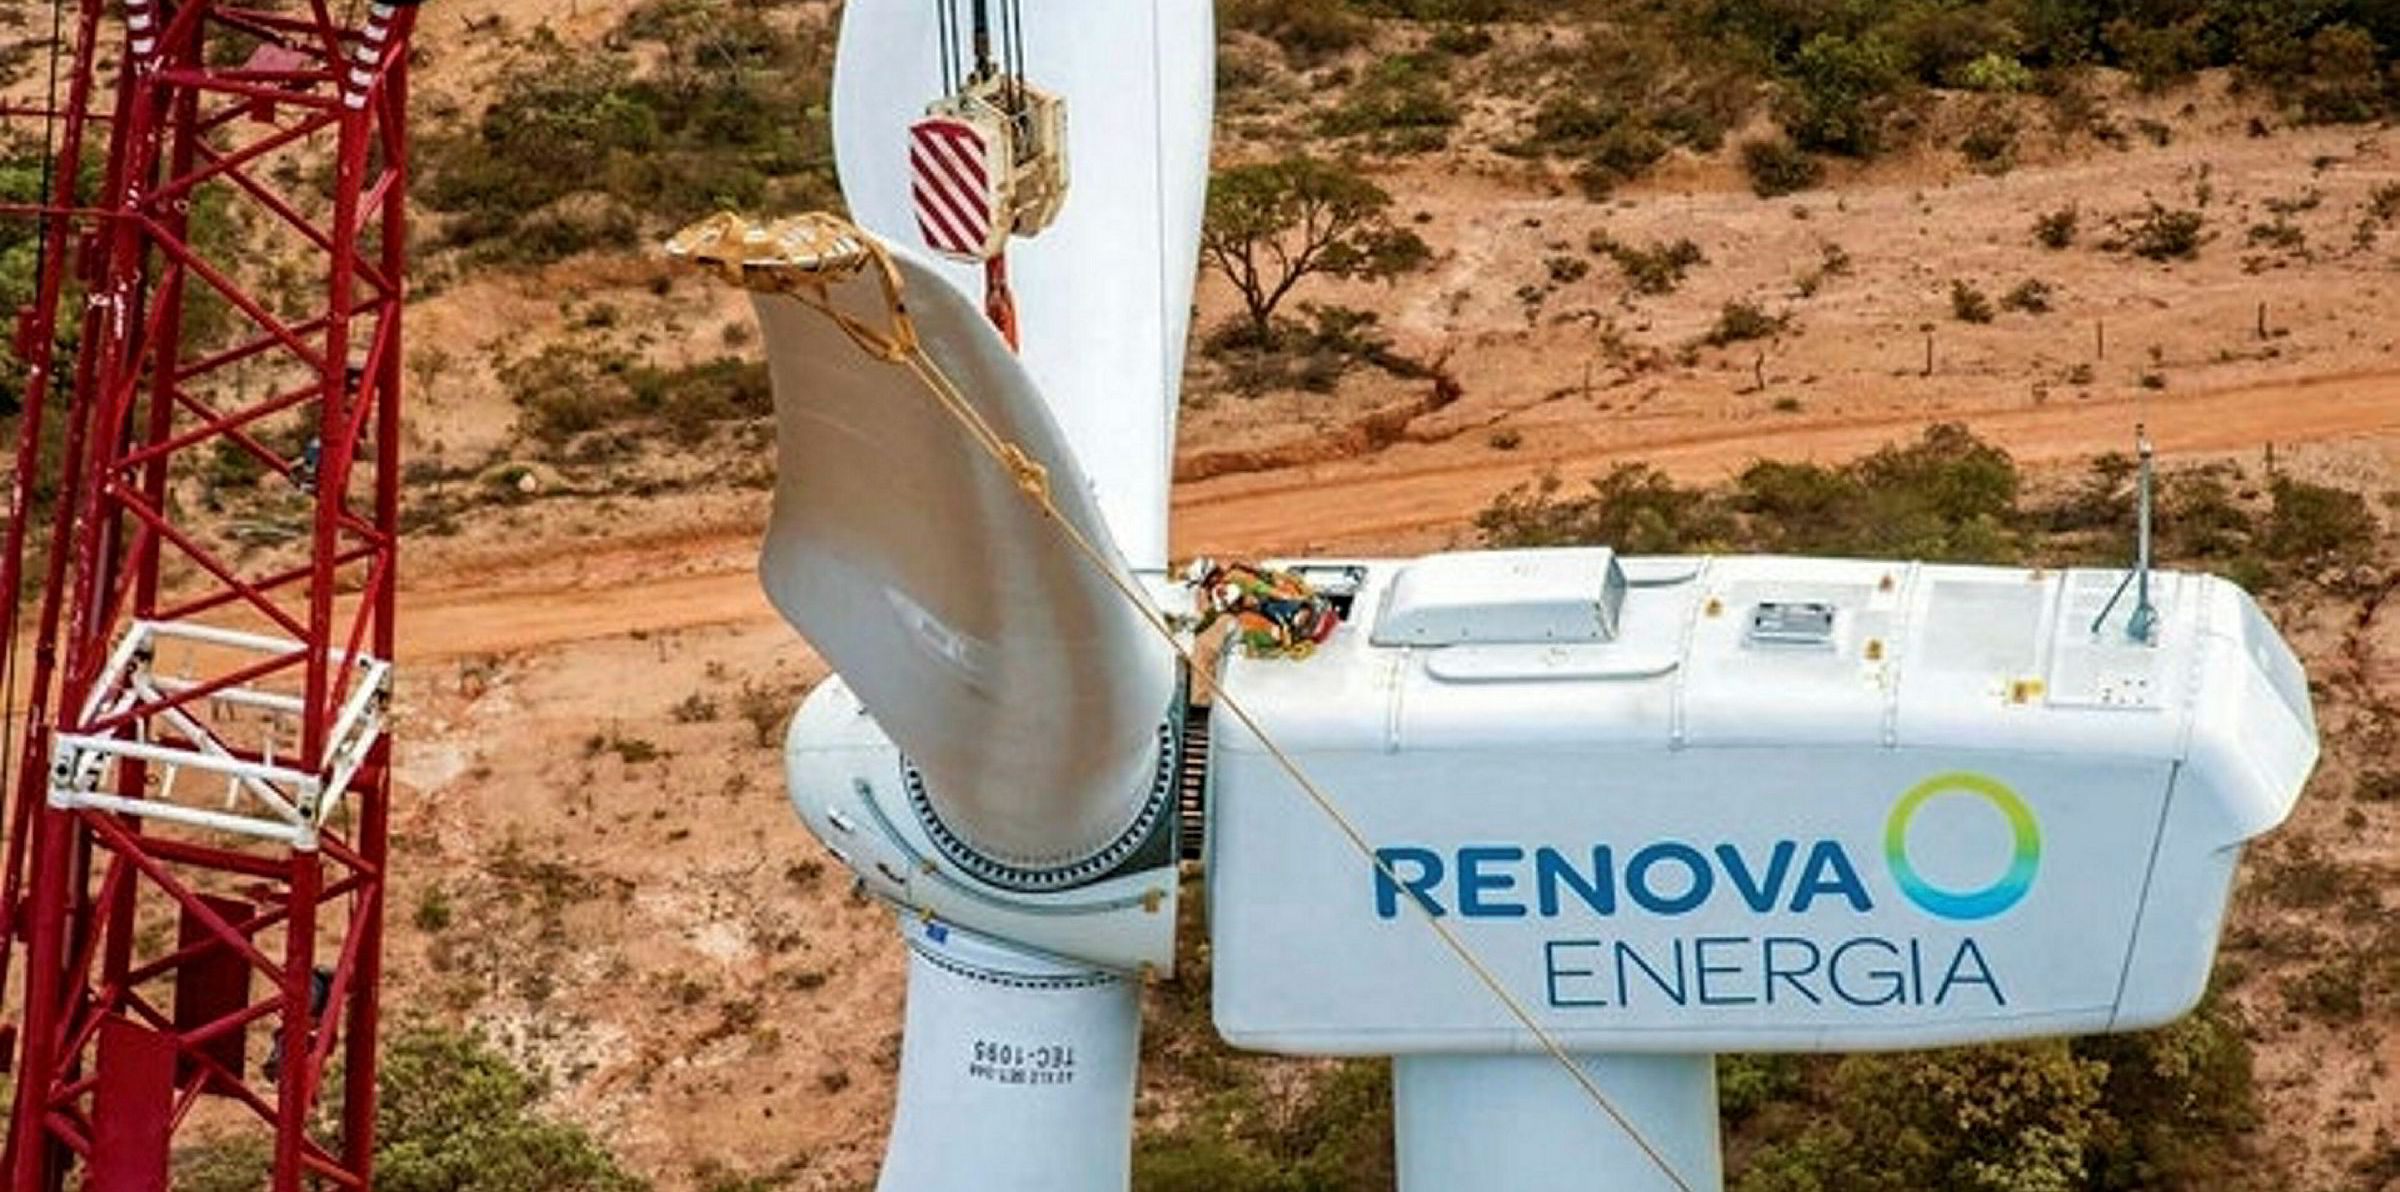 Brazil's Renova takes new AES offer for 730MW of wind assets